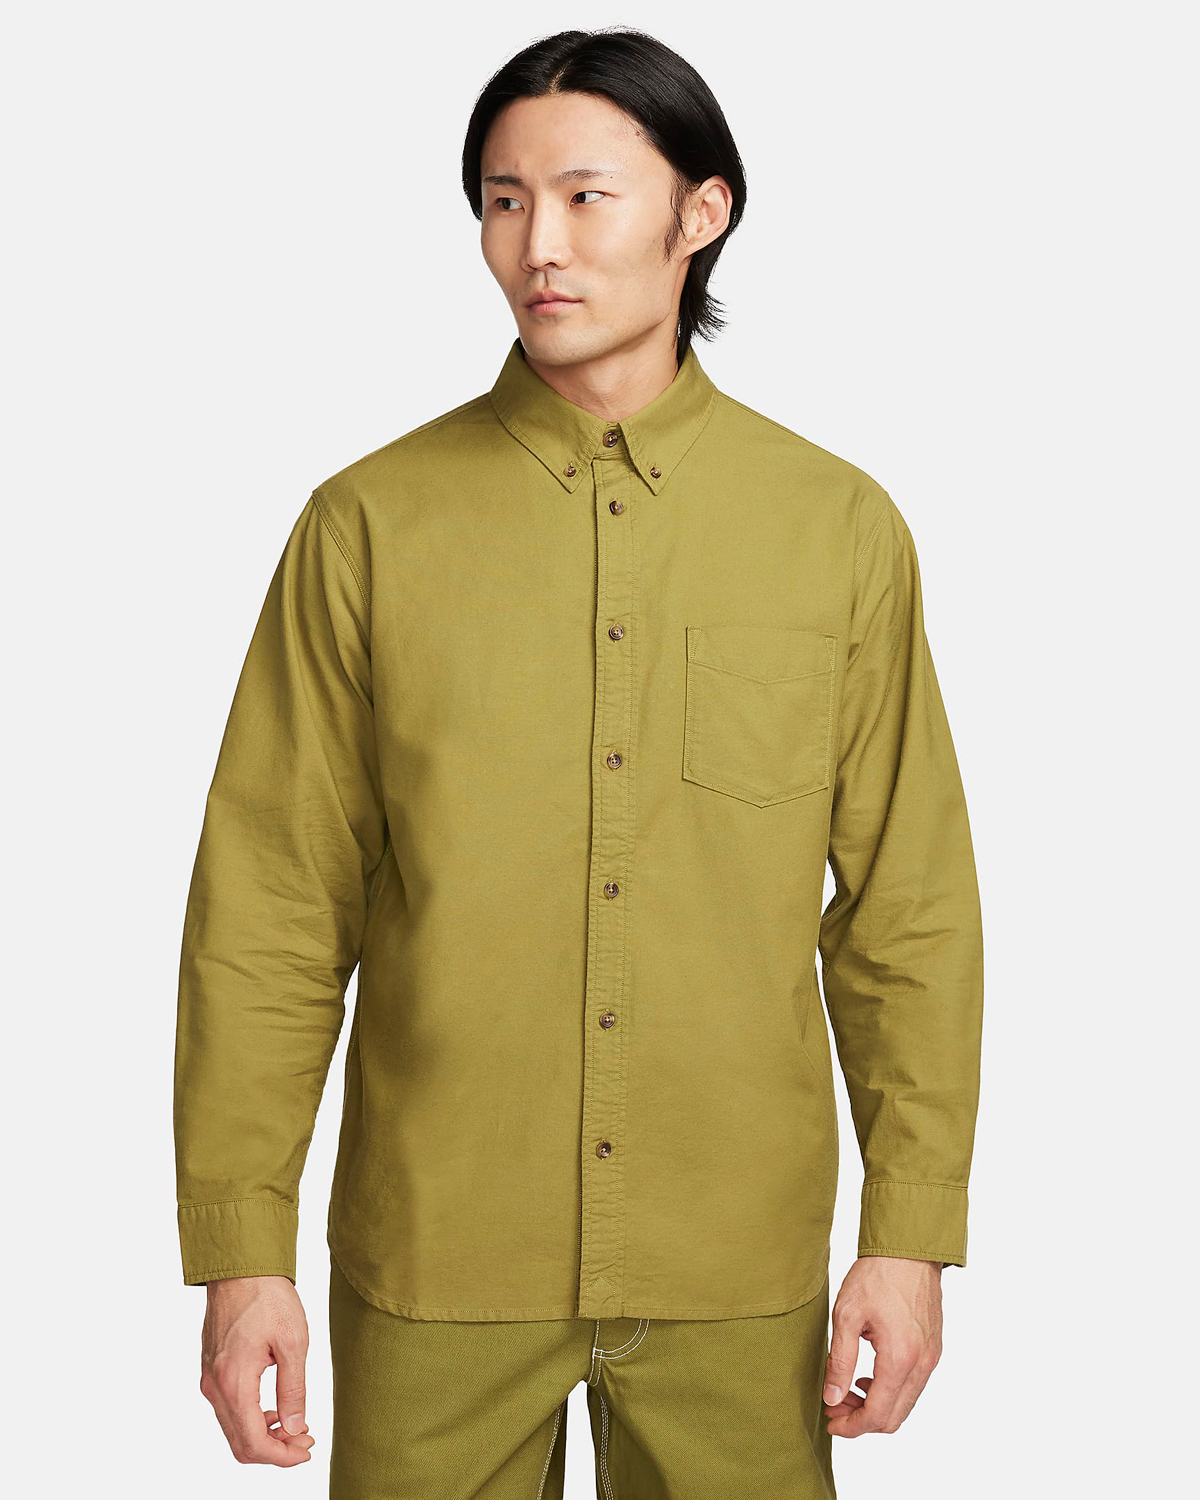 Nike-Life-Oxford-Button-Down-Top-Pacific-Moss